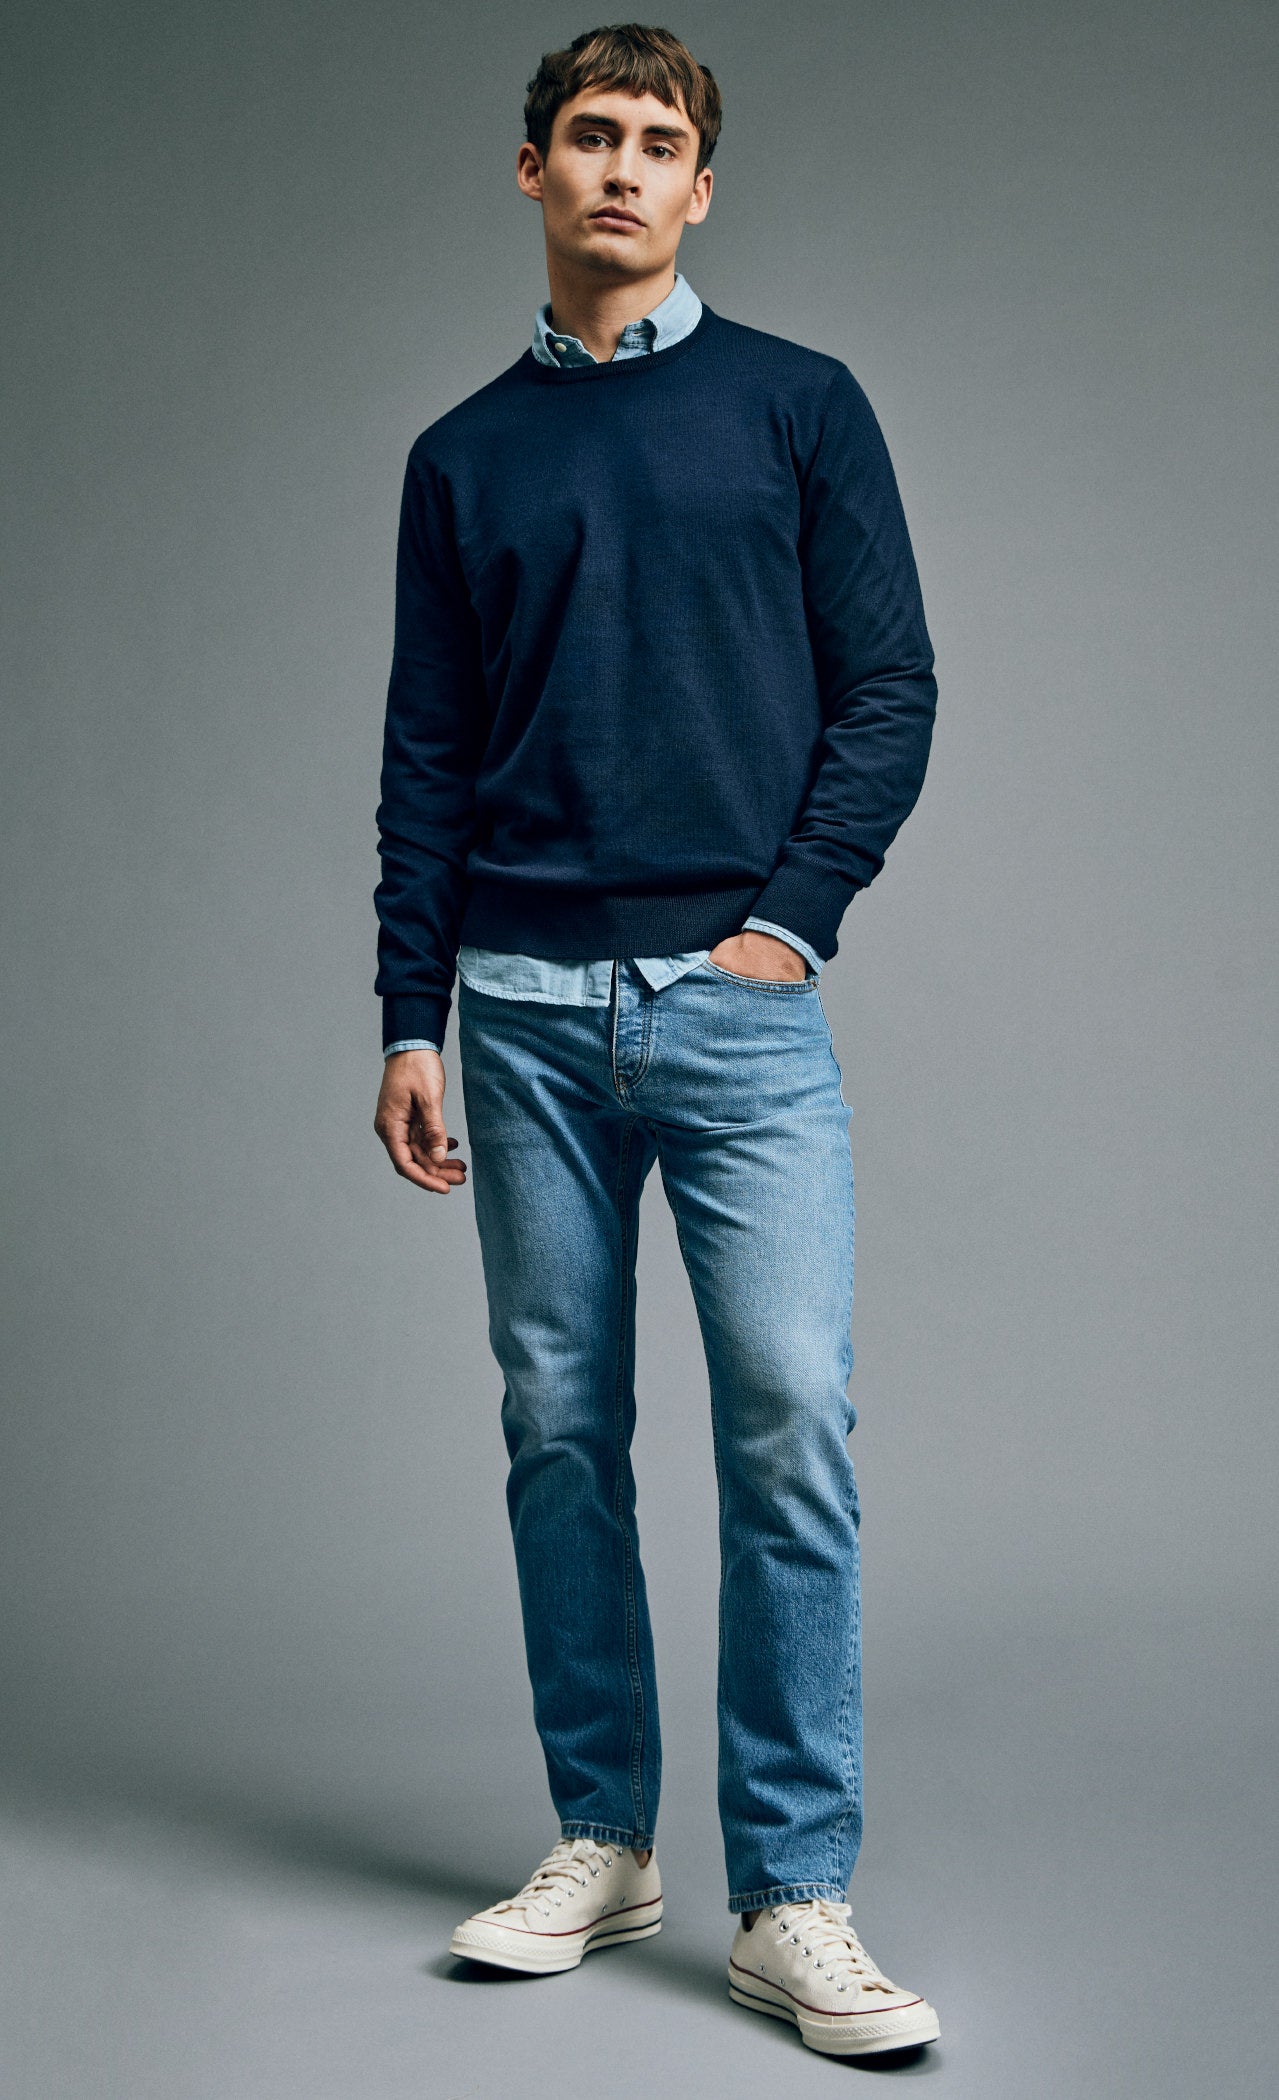 KING Essentials | With Navy Blue Crewneck knitwear and Light Jeans